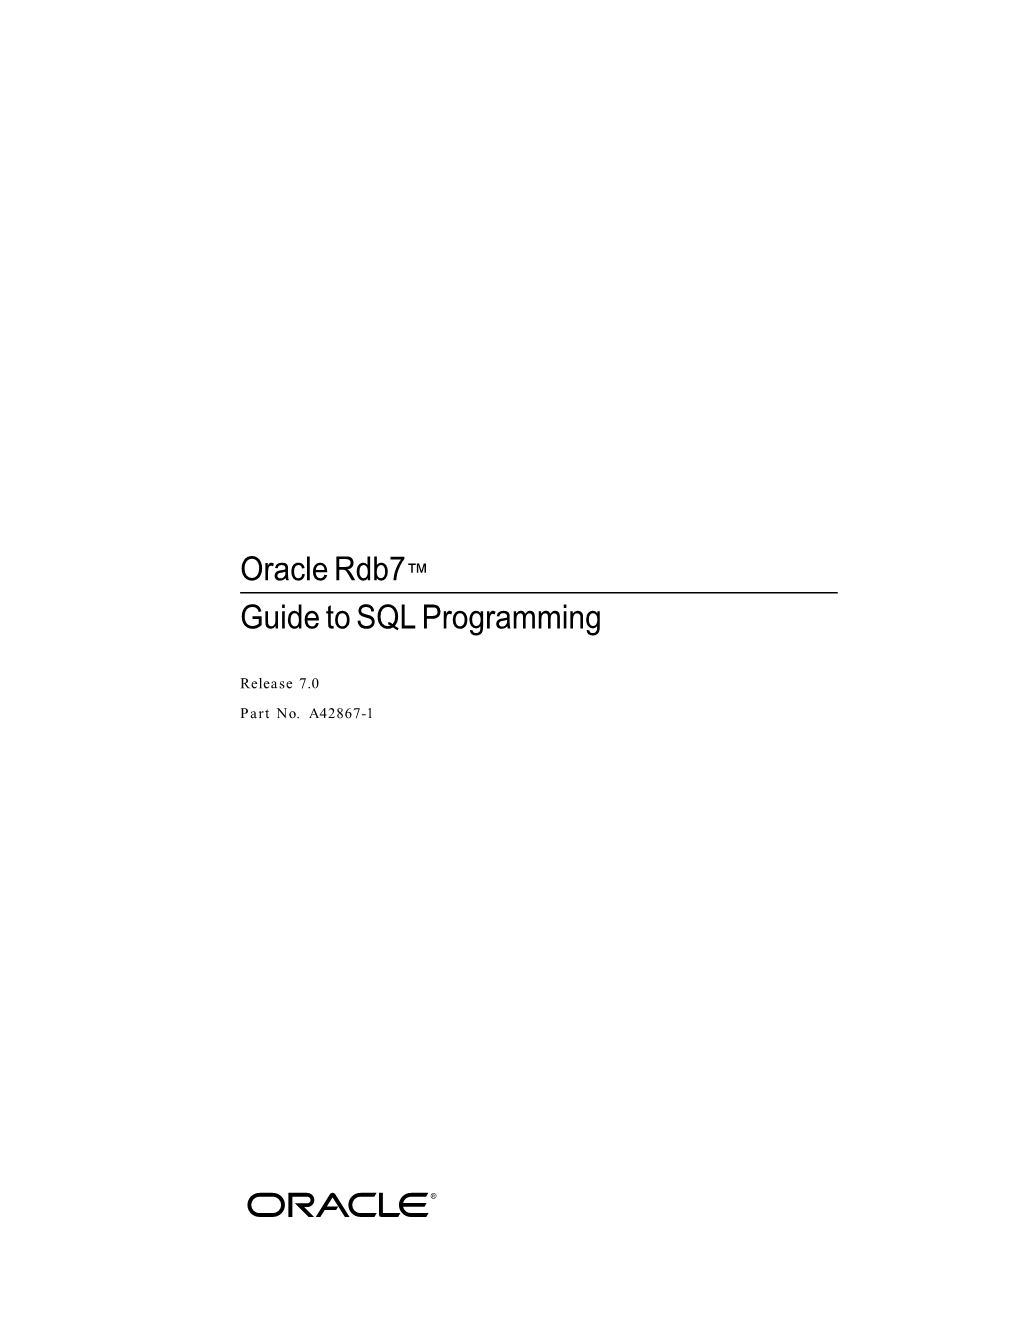 Oracle Rdb7™ Guide to SQL Programming